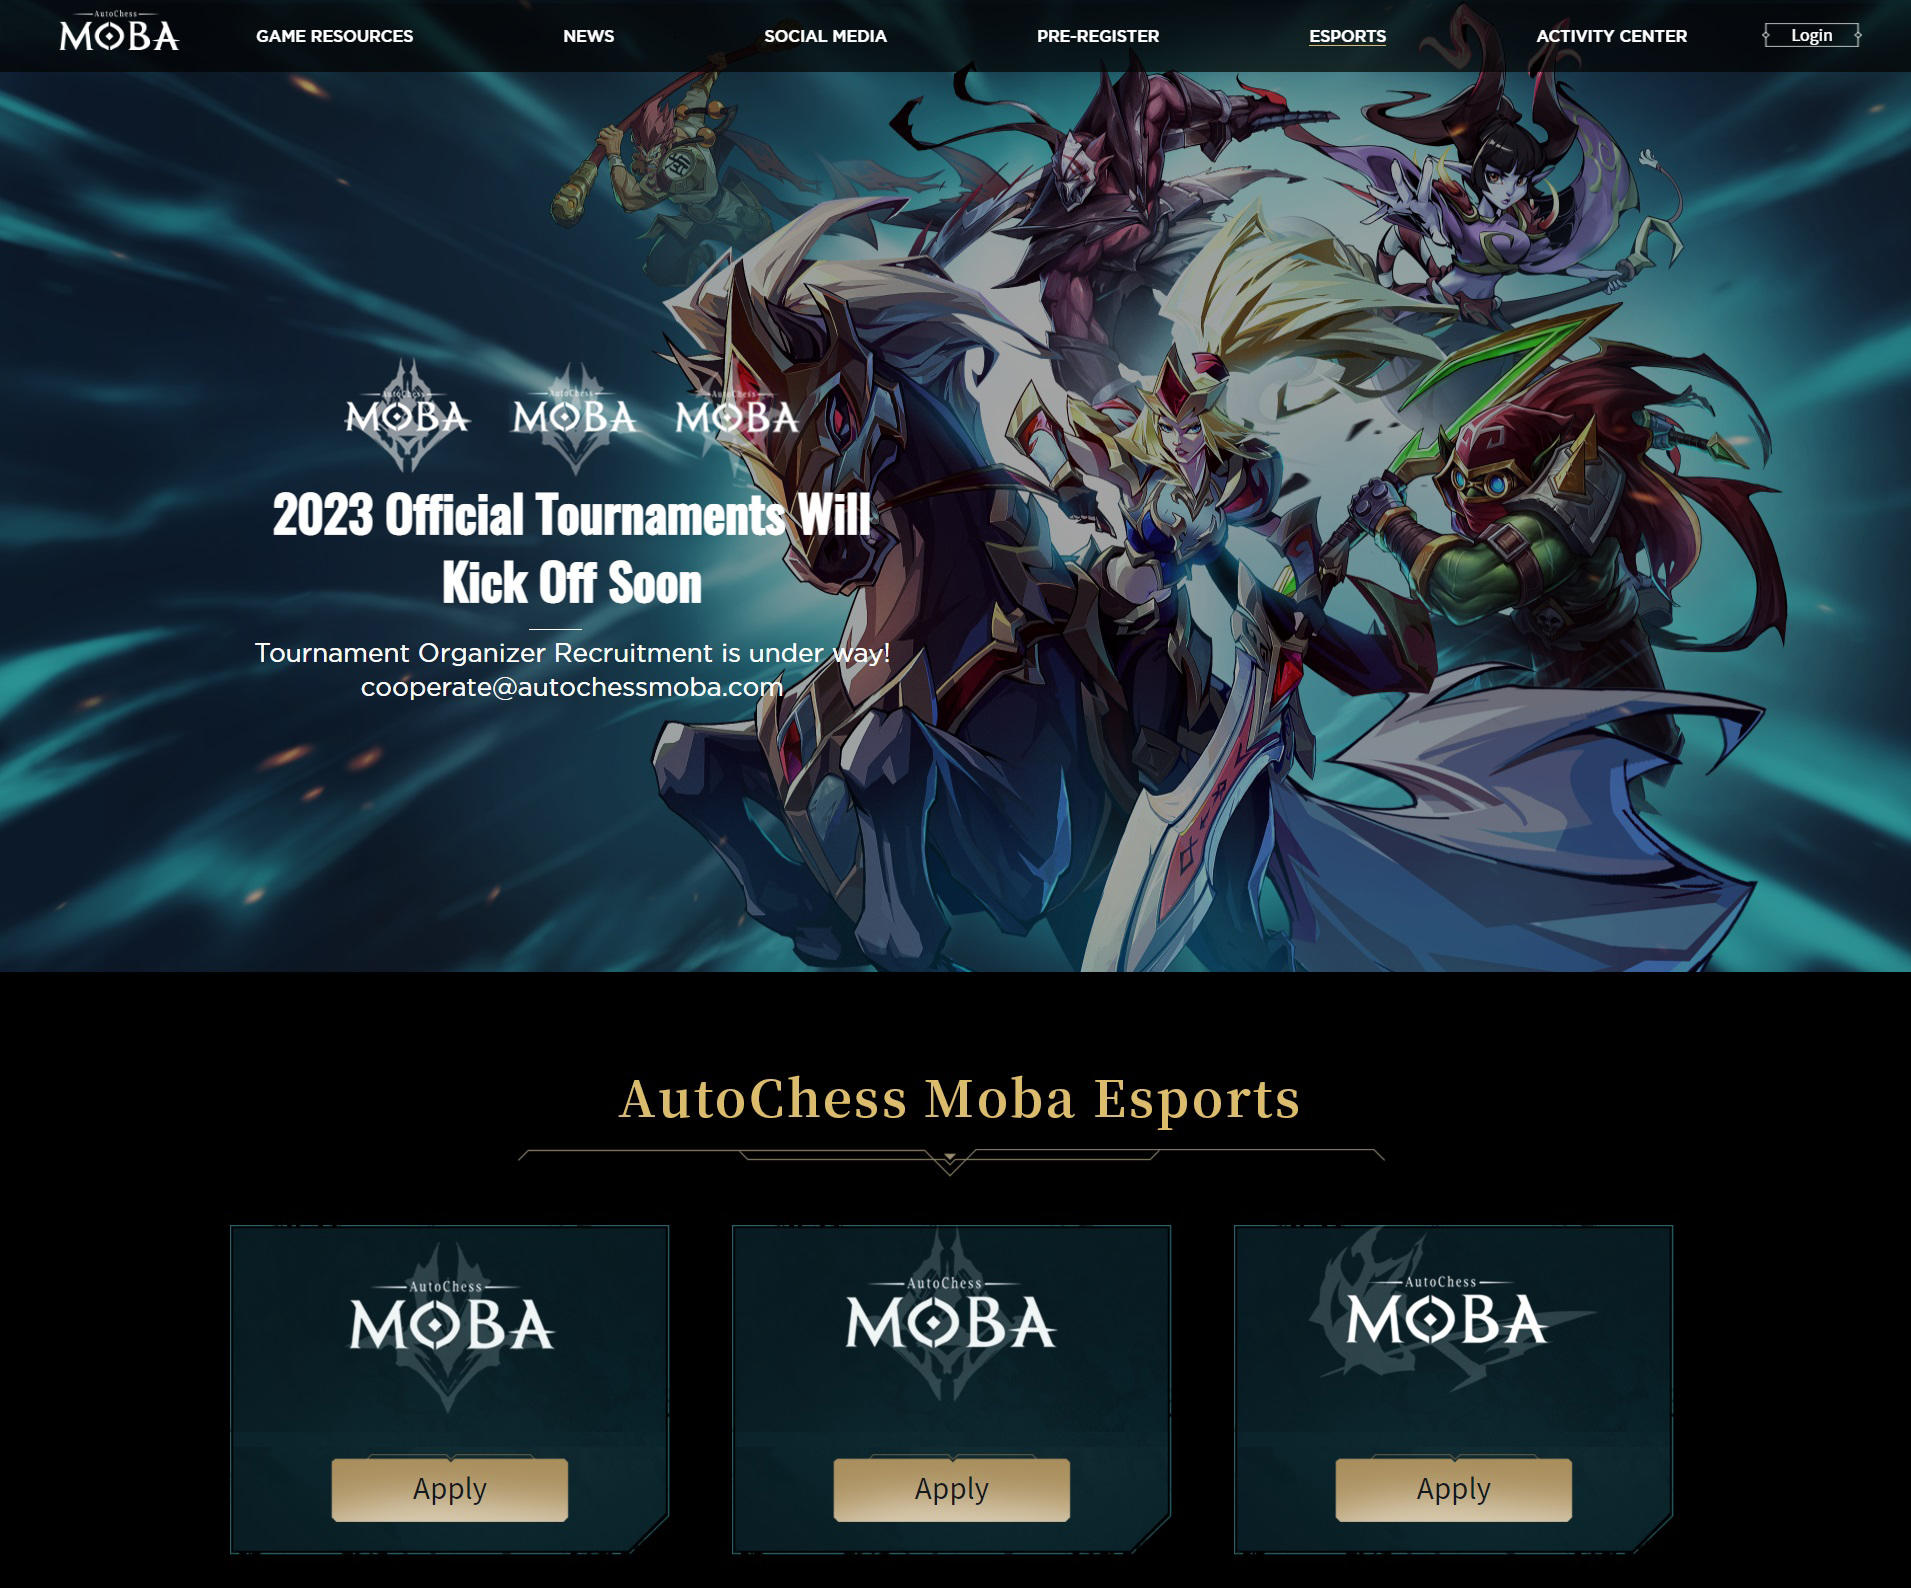 Playing AutoChess Moba in 2023 